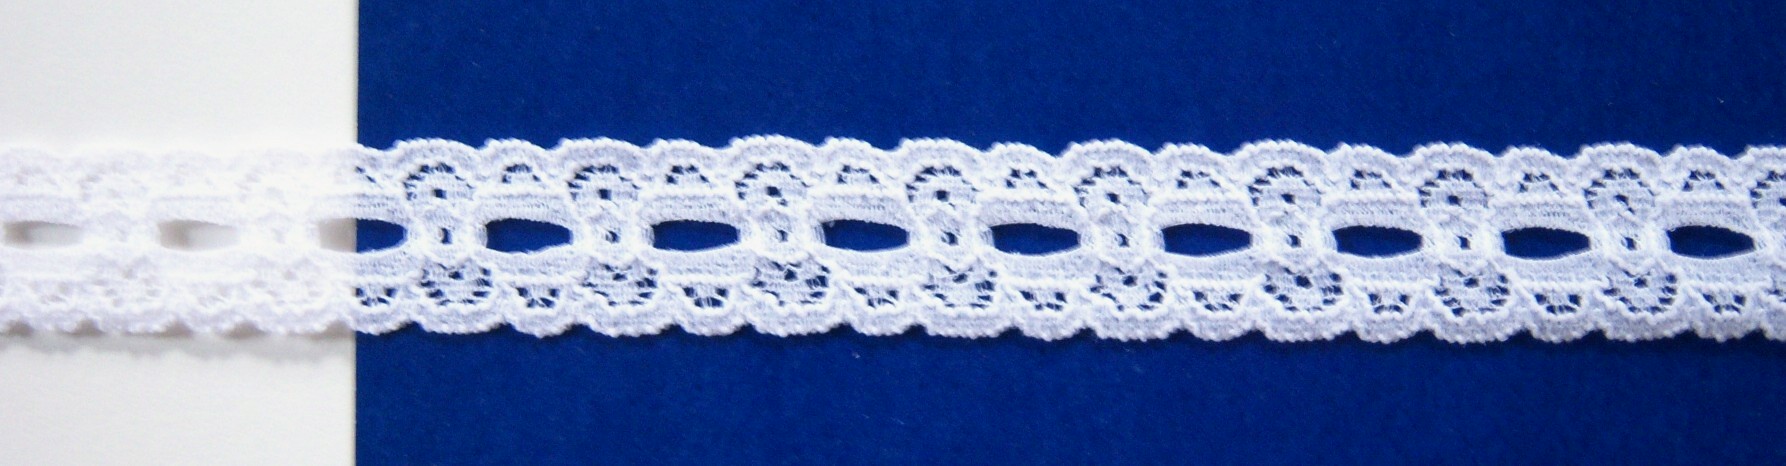 White Entredeux 13/16" Stretch Lace